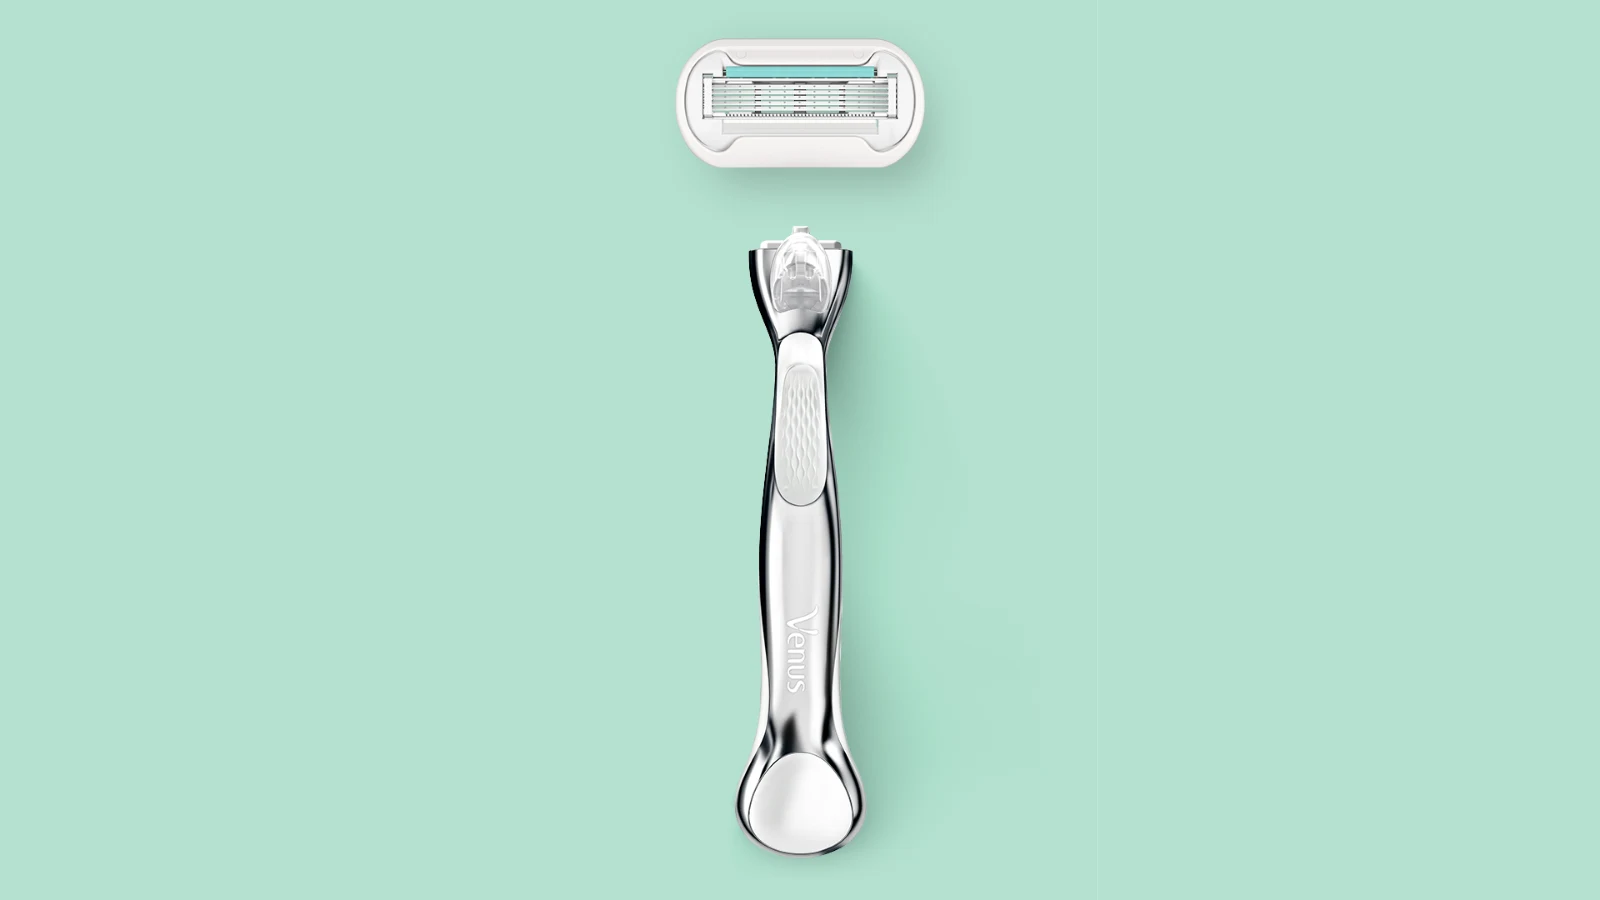 Try shaving tools designed for facial hair